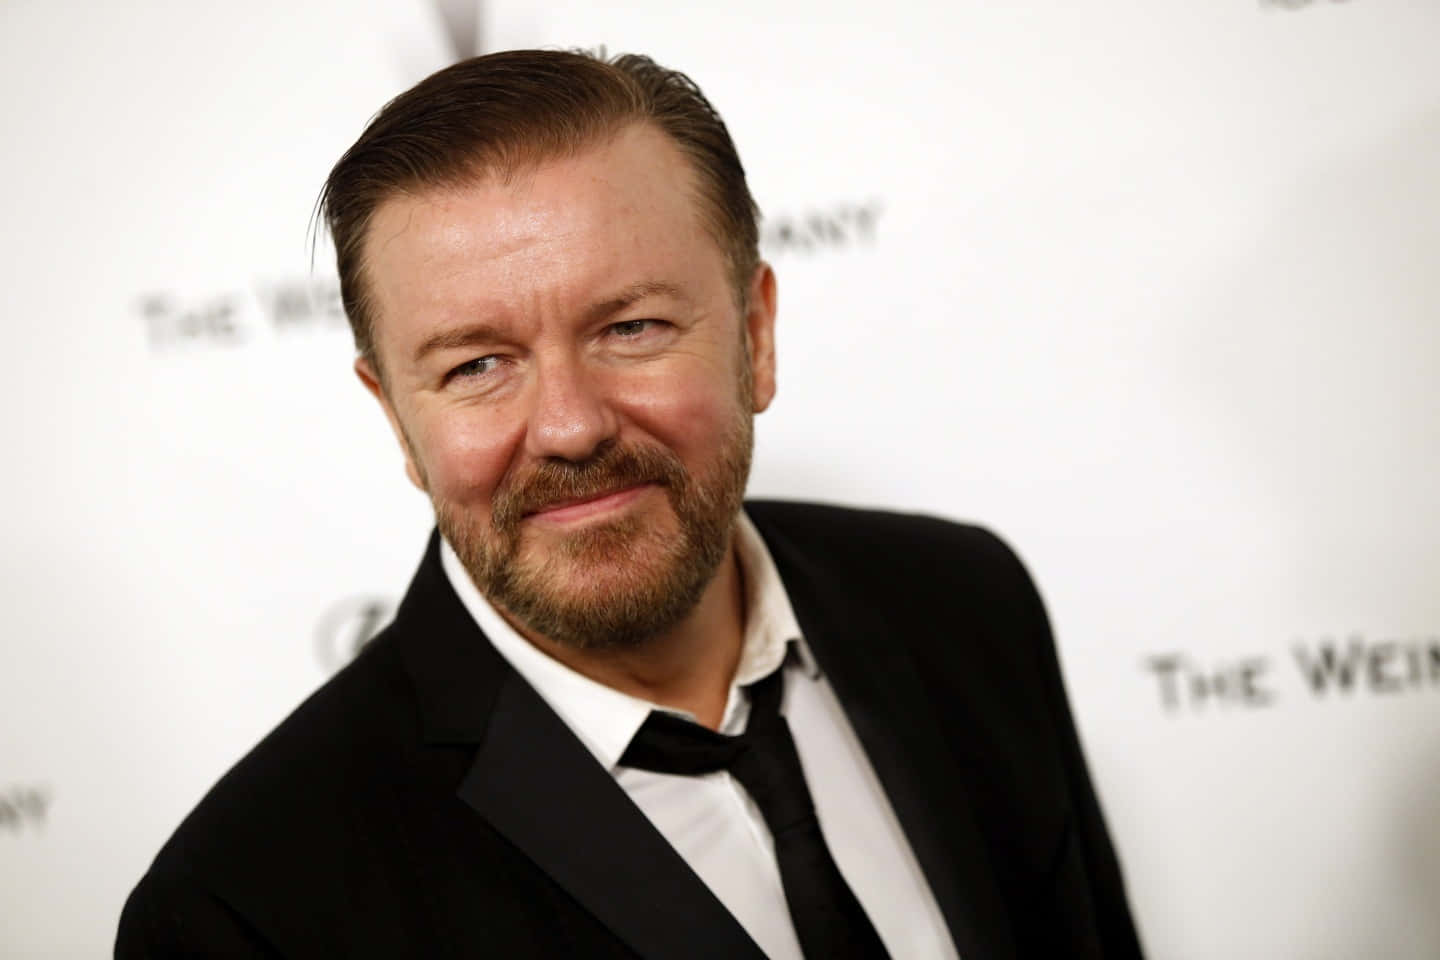 Ricky Gervais, adorned with a smart casual look, smiling at the camera. Wallpaper